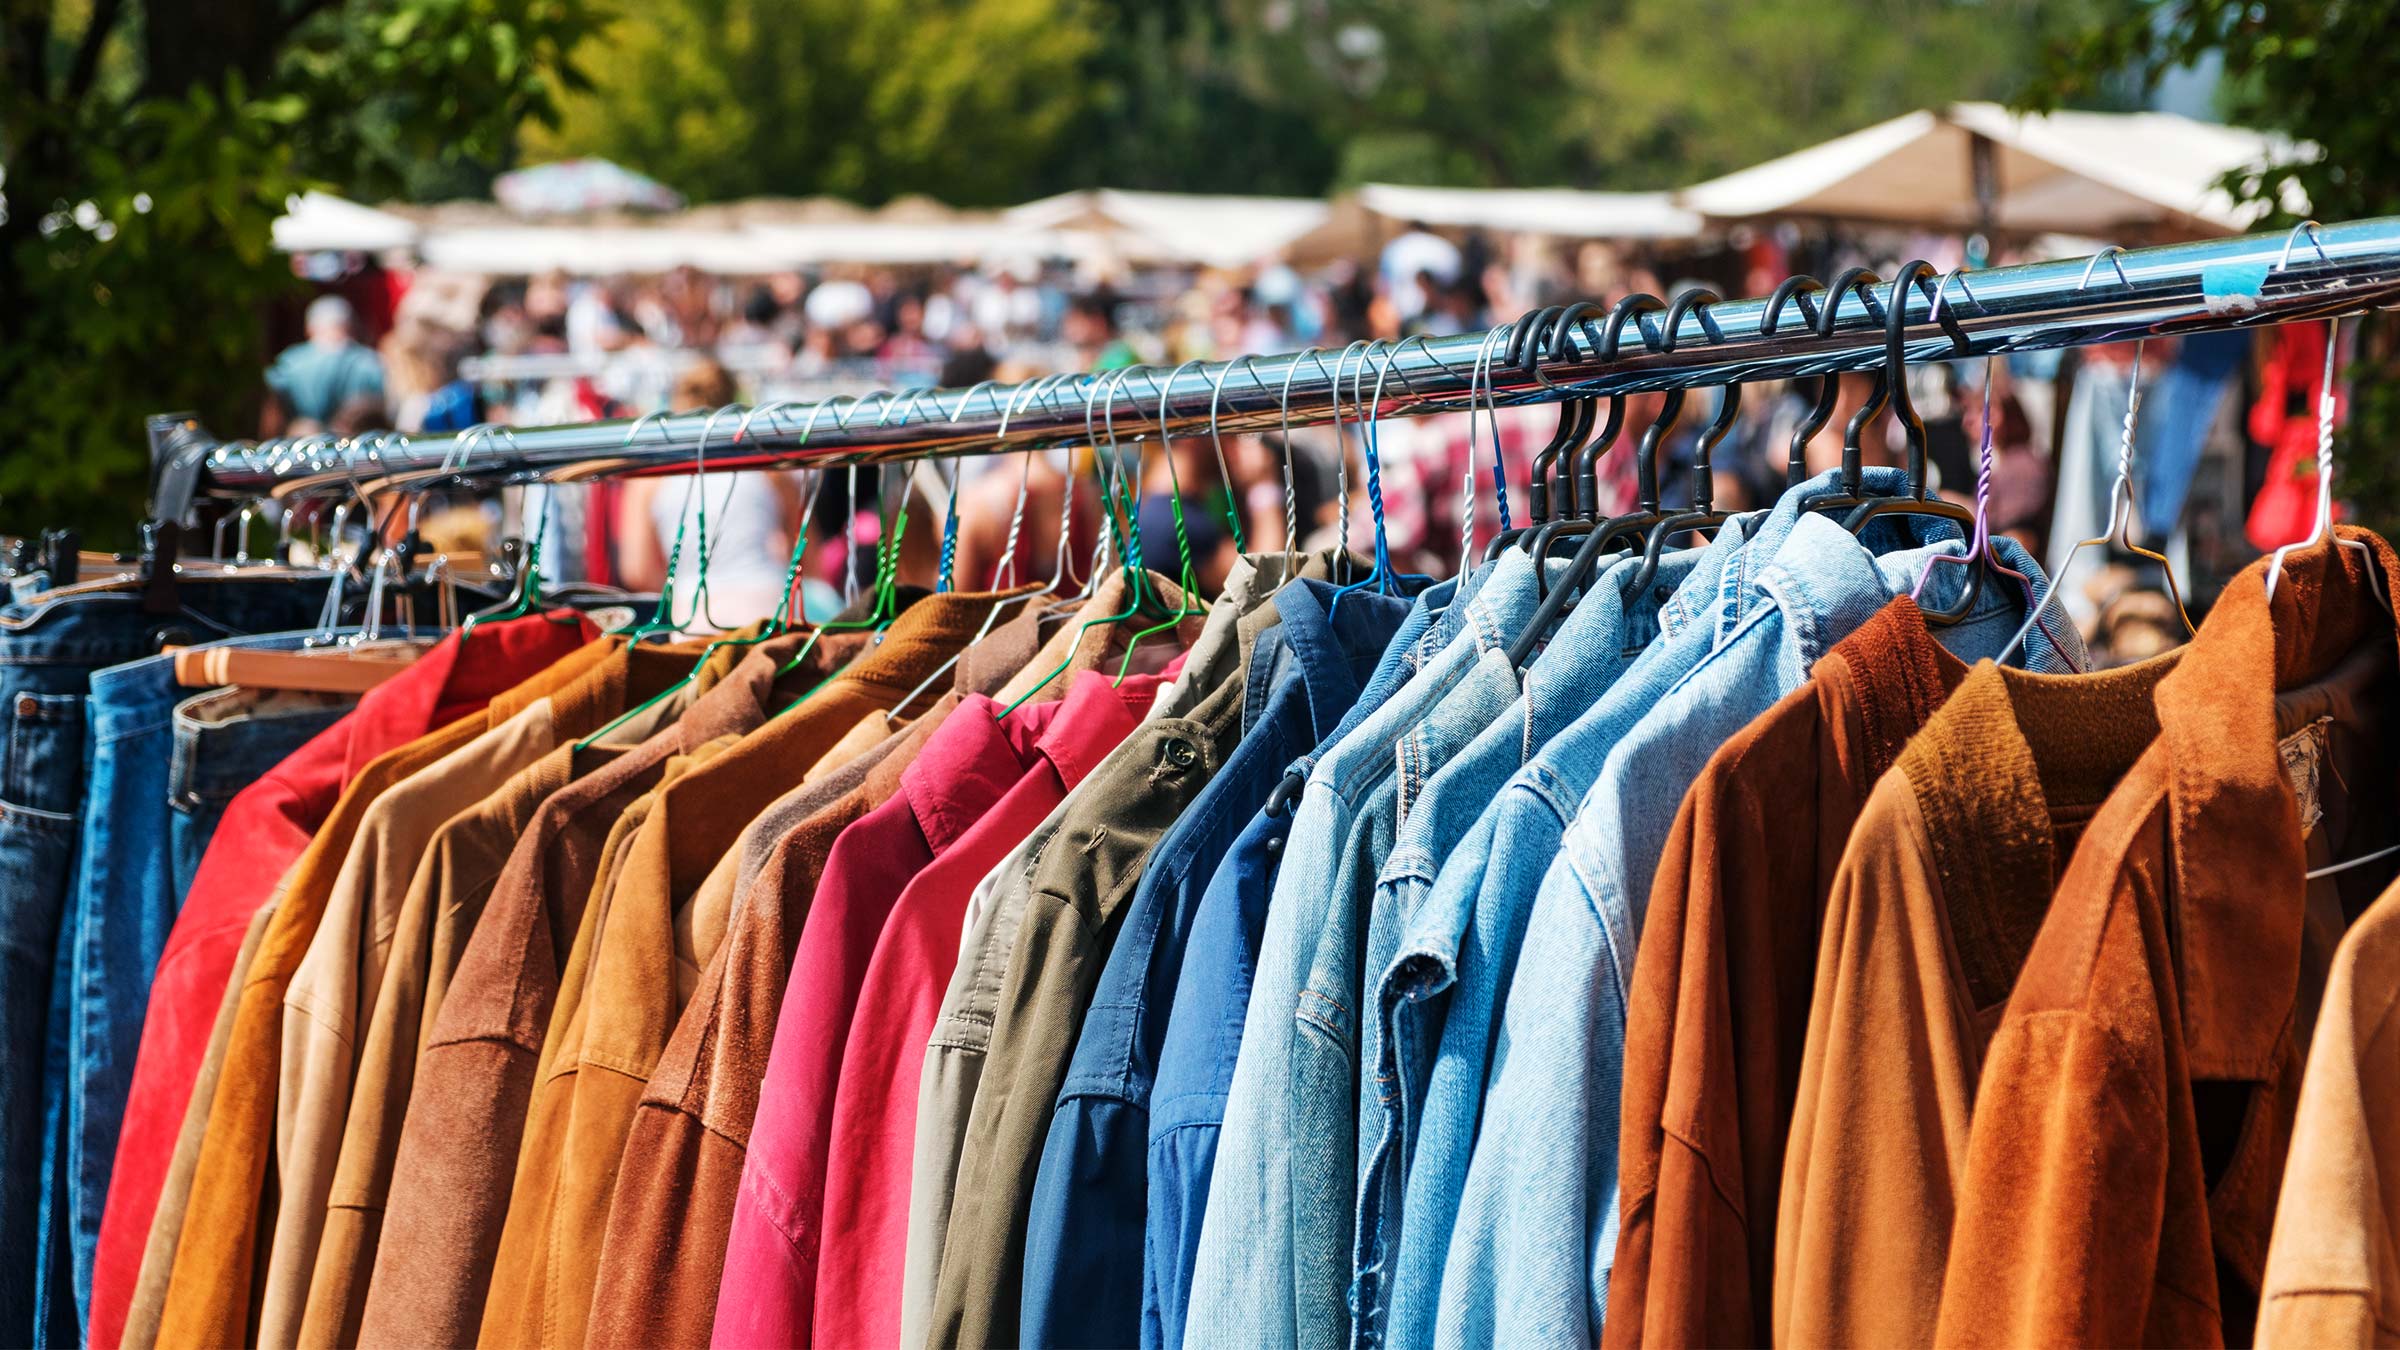 The resale revolution: we're seeing the rise of second-hand first